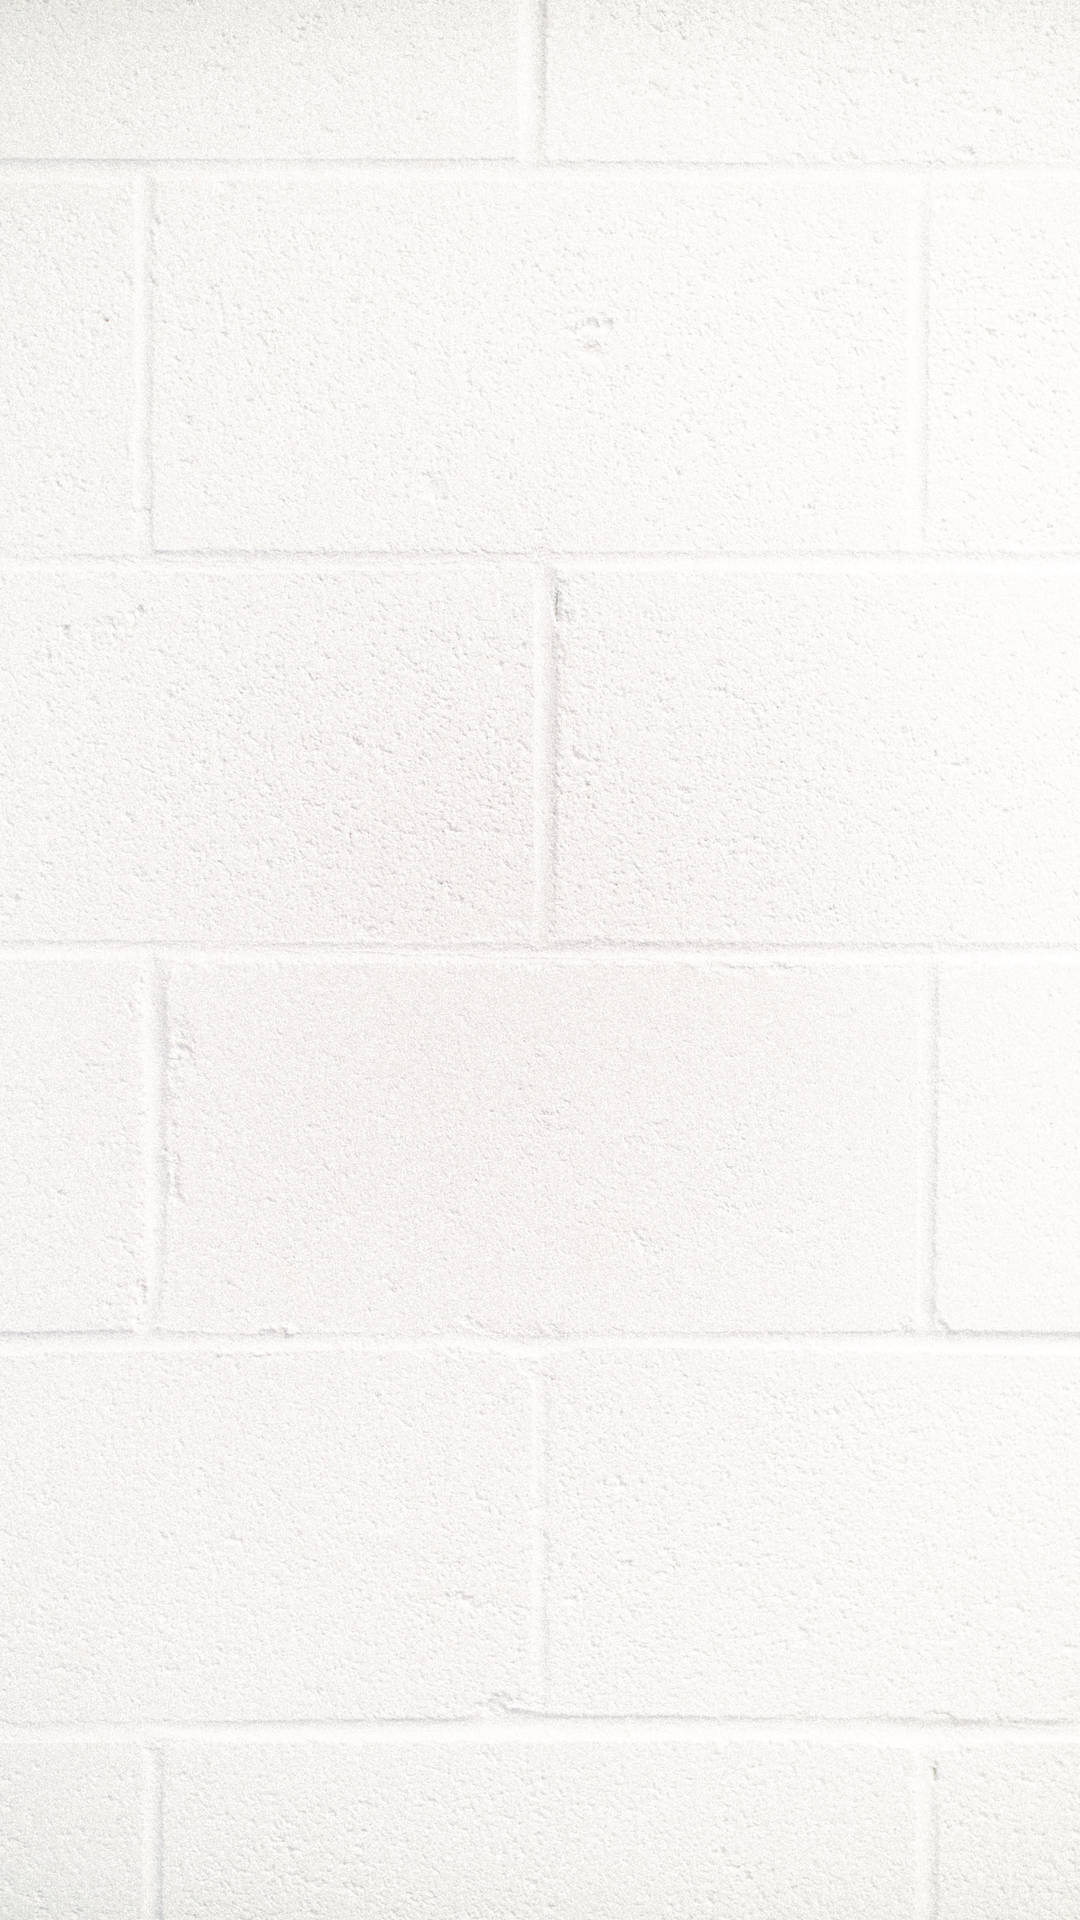 Textured 3376X6000 Wallpaper and Background Image